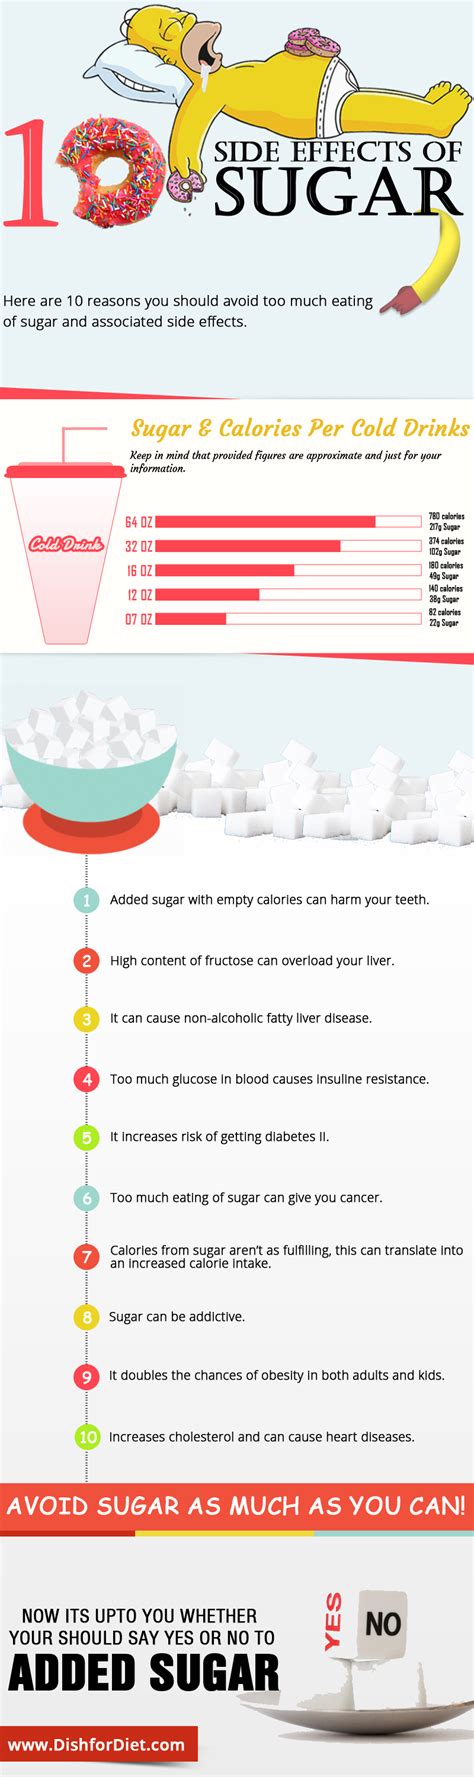 Side Effects Of Sugar Infographic Visually